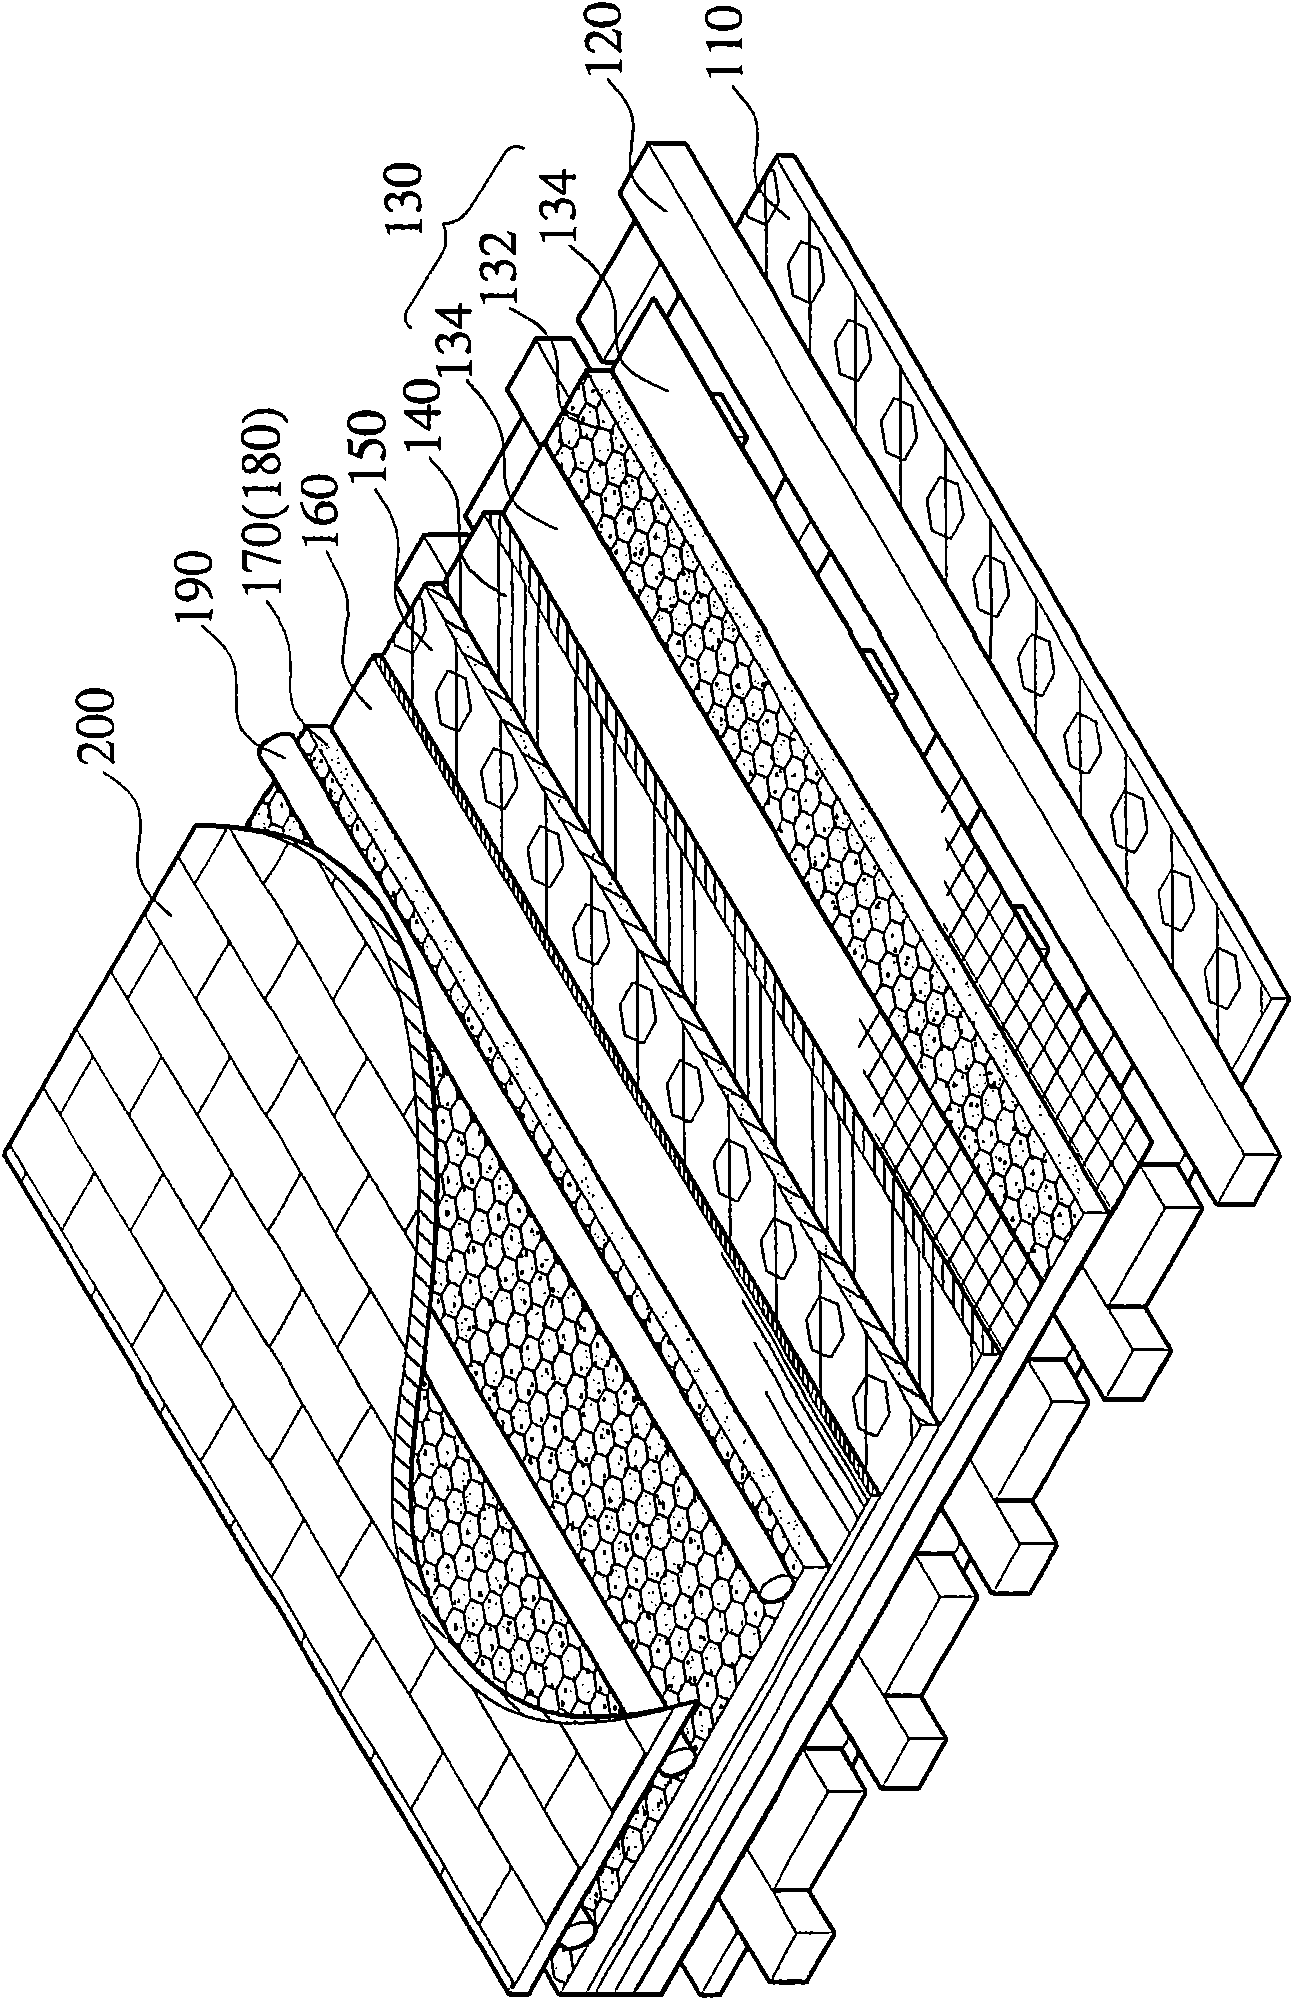 Storey noise control structure and method for constructing same